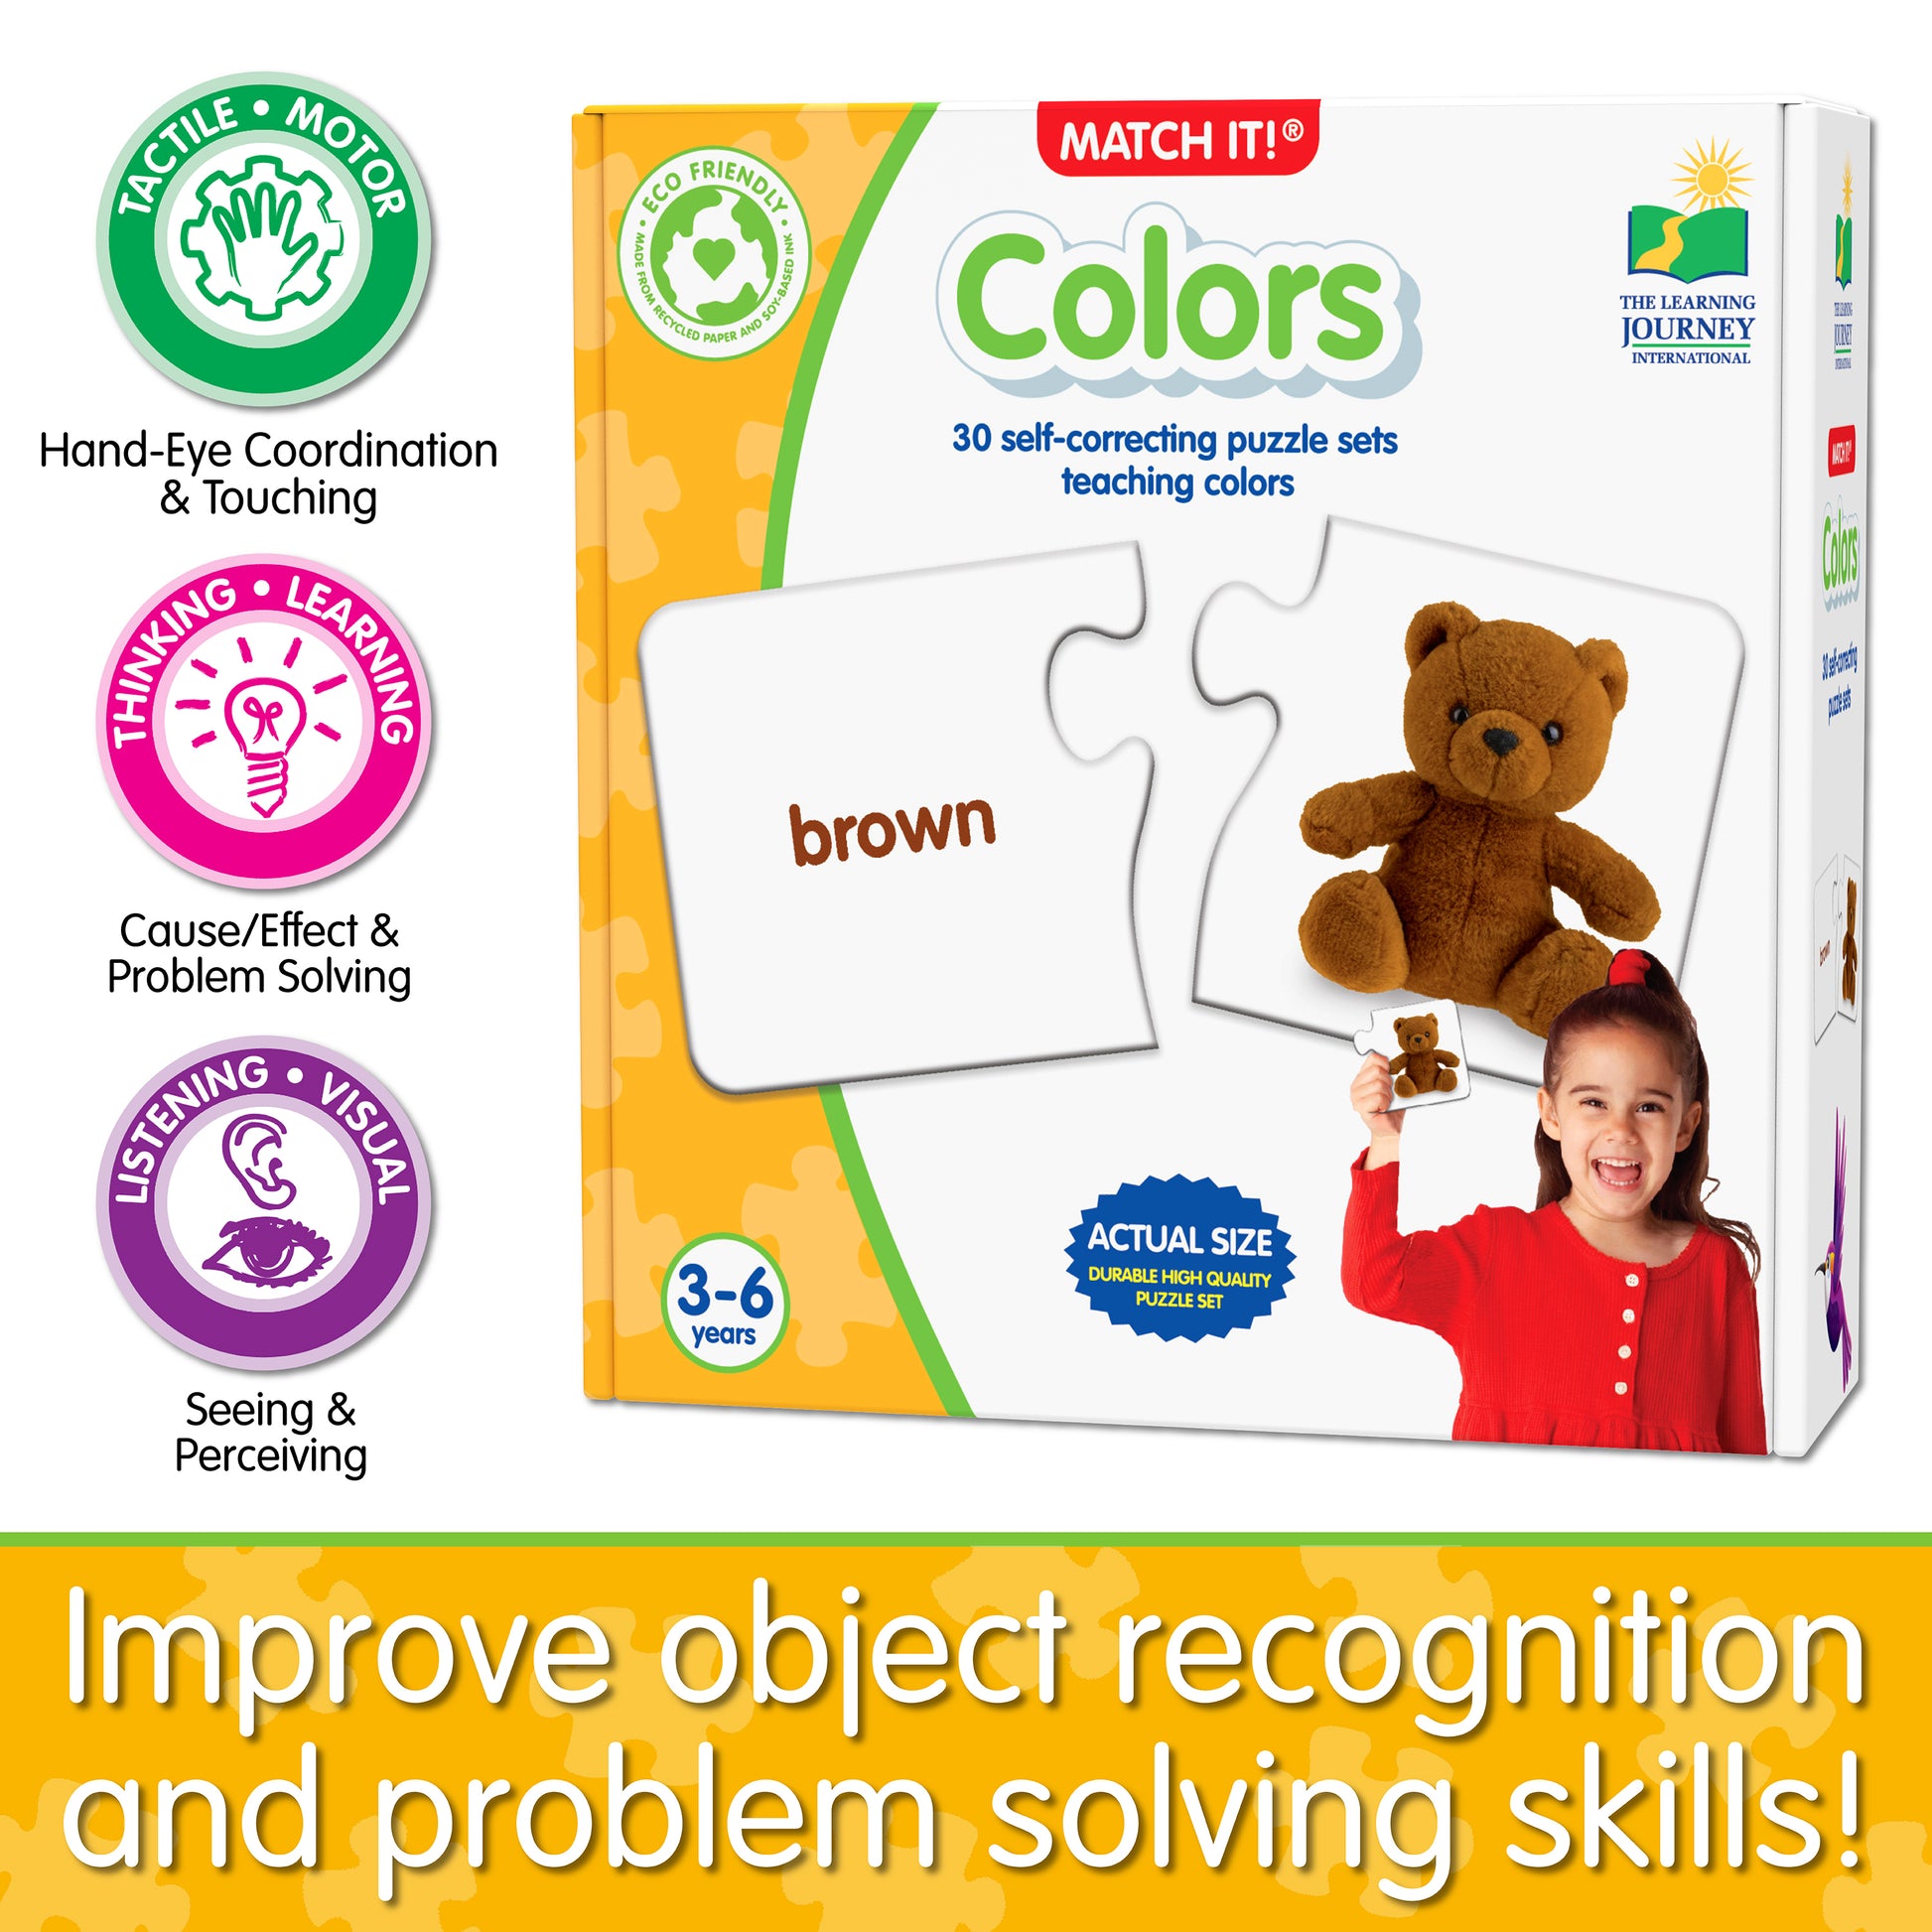 Infographic about Match It - Colors' educational benefits that says, "Improve object recognition and problem solving skills!"